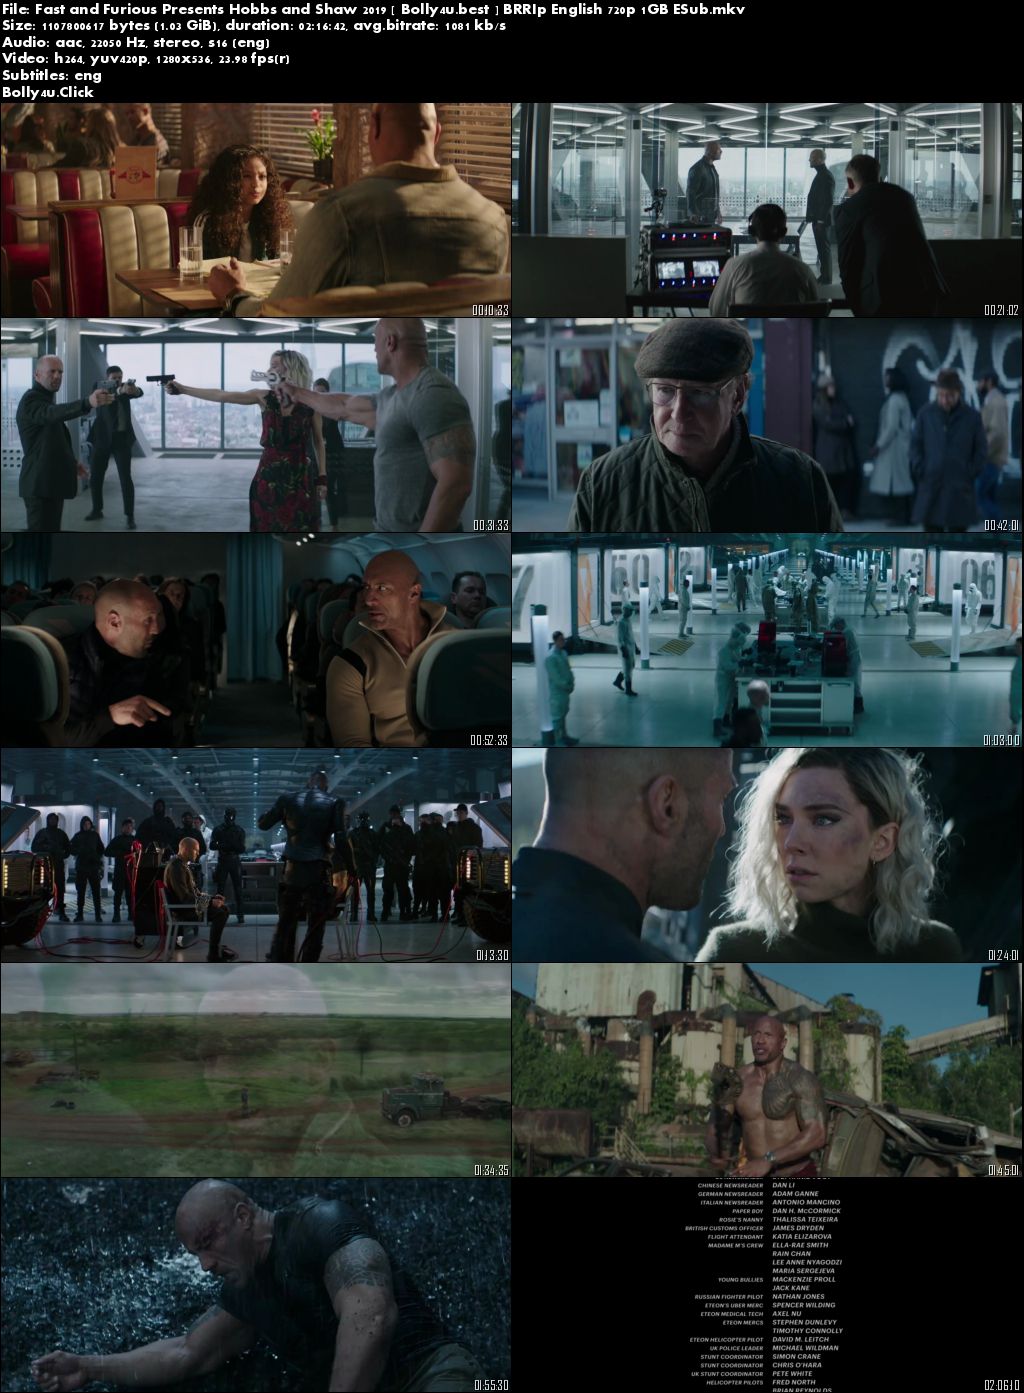 Fast and Furious Presents Hobbs and Shaw 2019 BRRip 450MB English 480p ESub Download